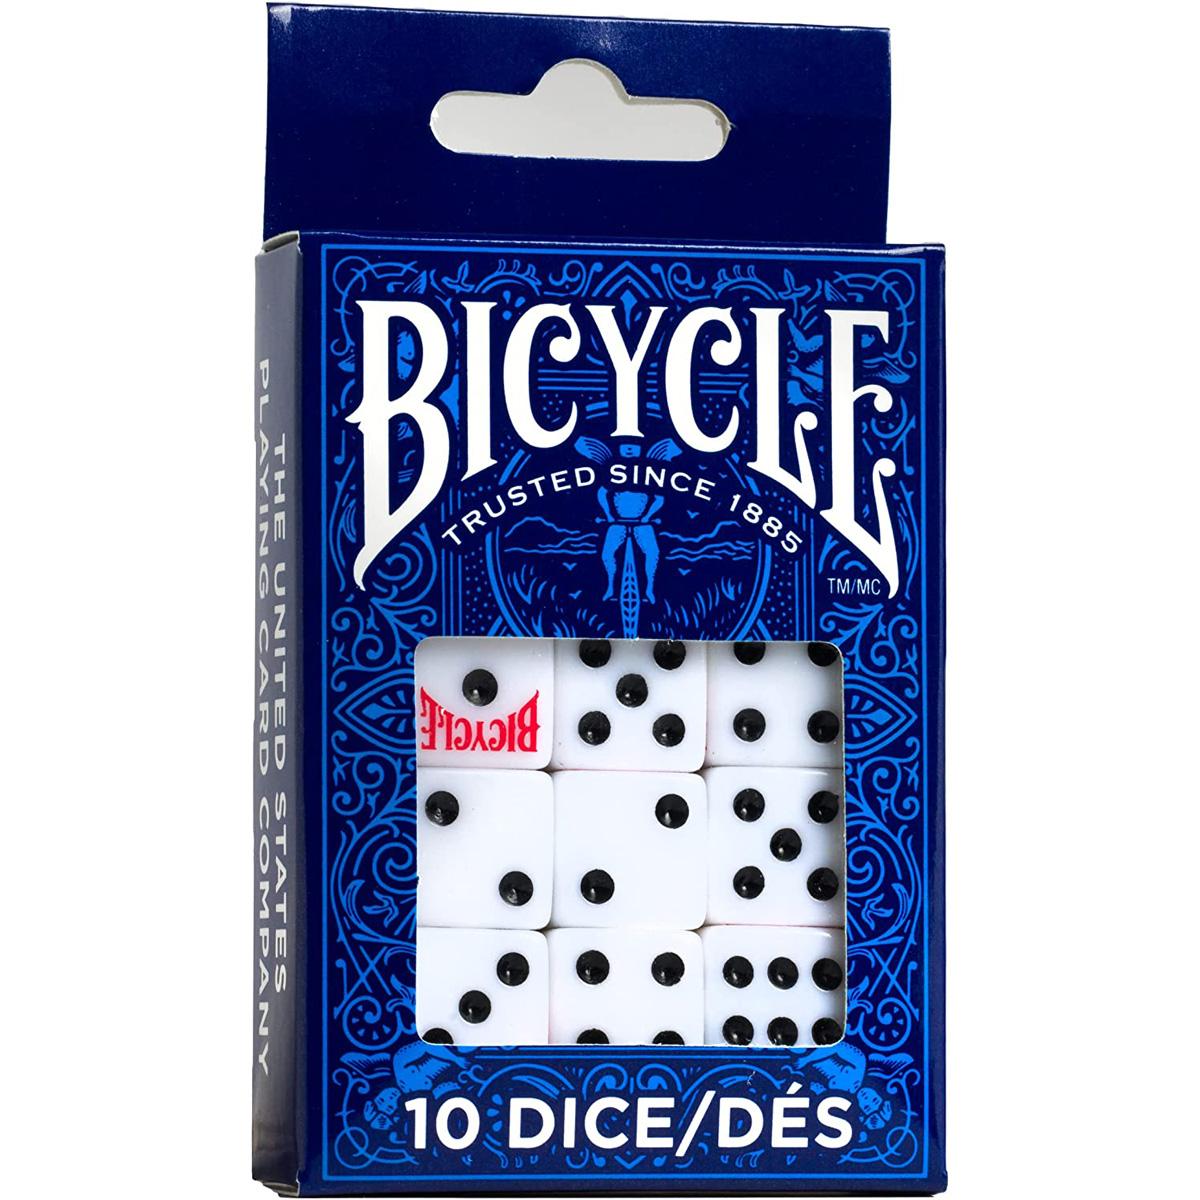 Bicycle 6 Sided Dice 10 Set for $1.99